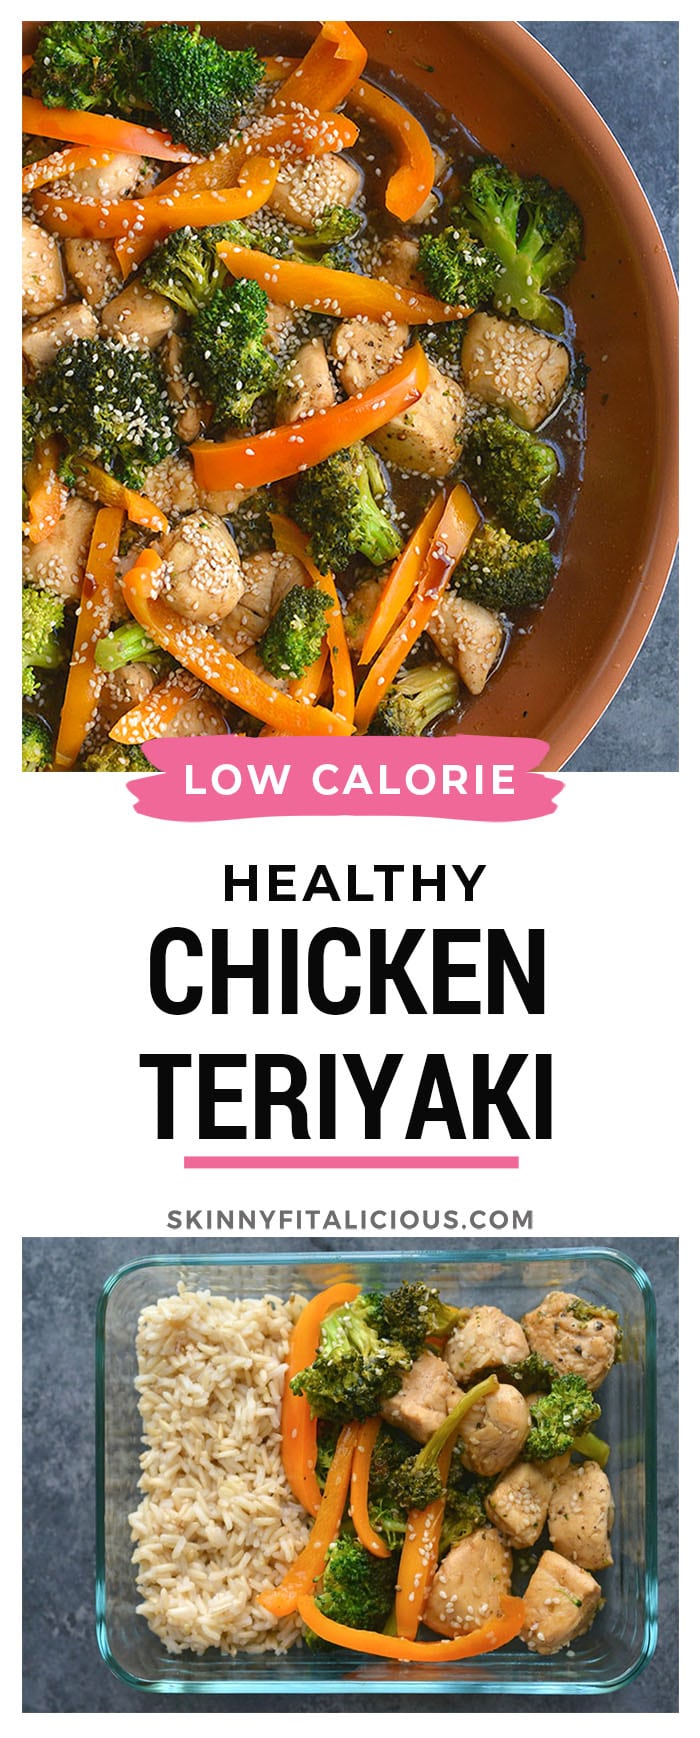 Chicken Teriyaki Broccoli! A classic recipe made with less sugar and soy free. An easy recipe that's quick, delicious and nutritious! Gluten Free + Low Calorie